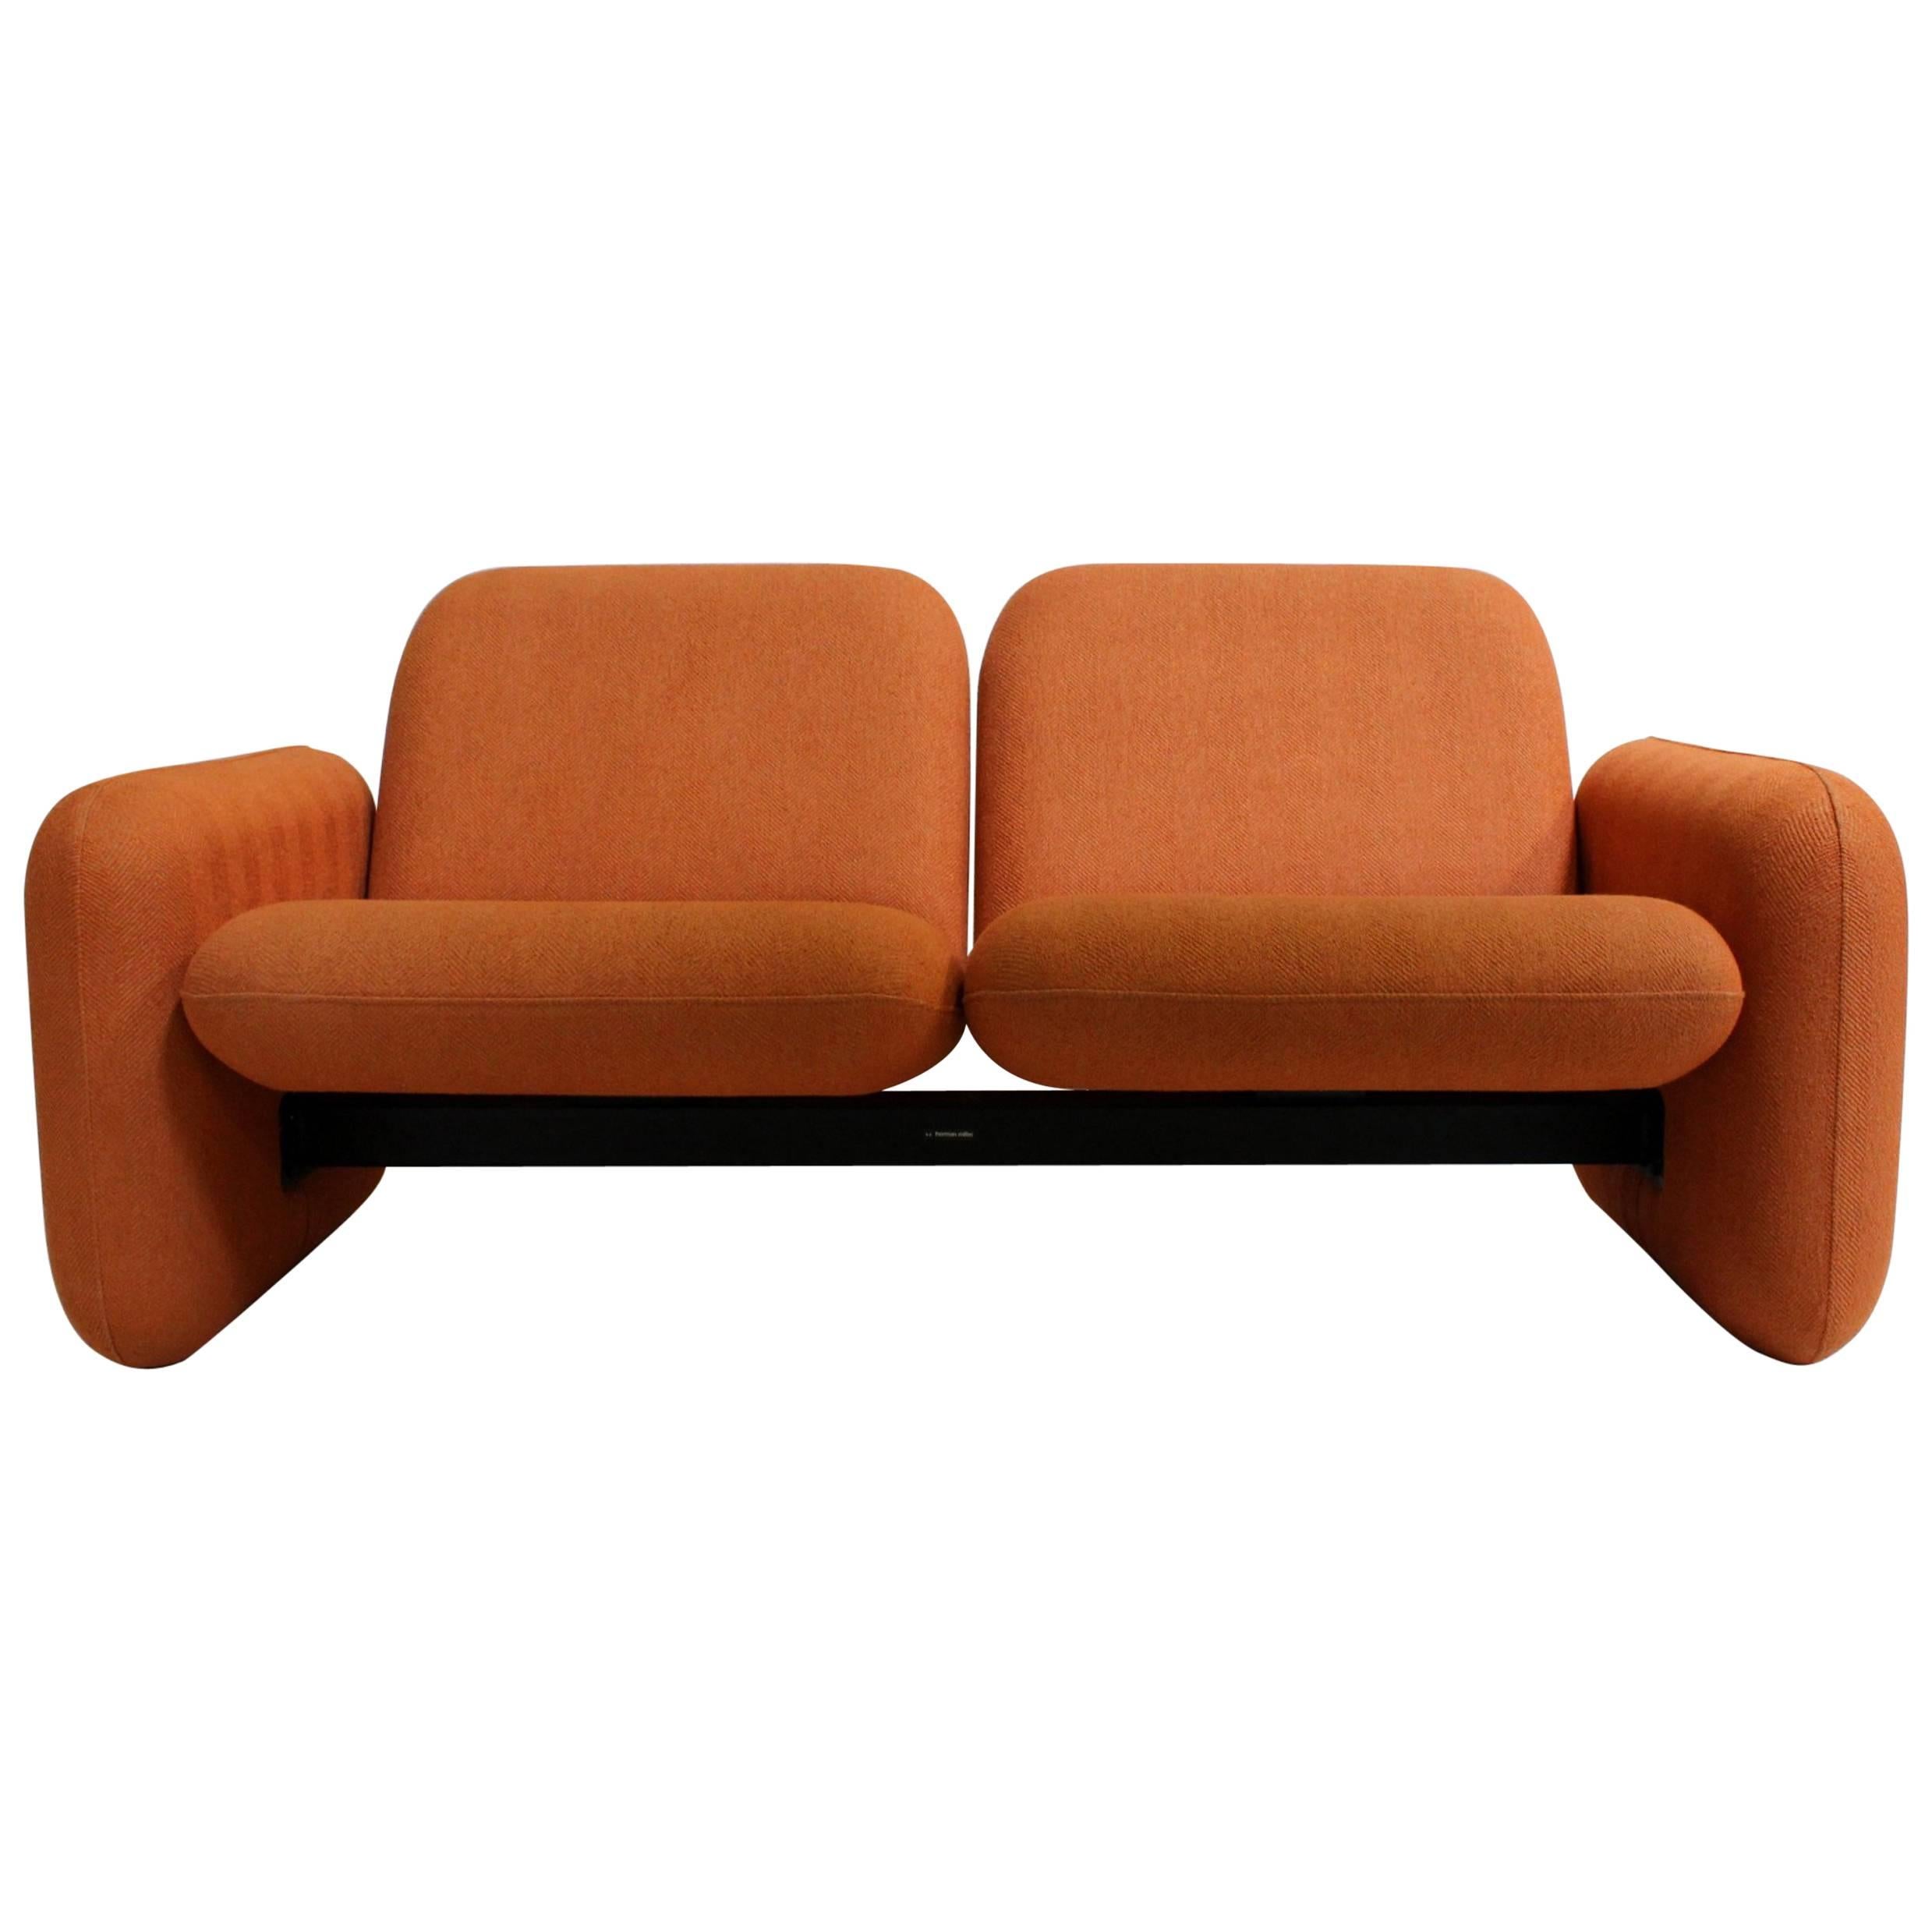 Rare 1970s Modern Ray Wilkes for Herman Miller "Chicklet" Love Seat Sofa